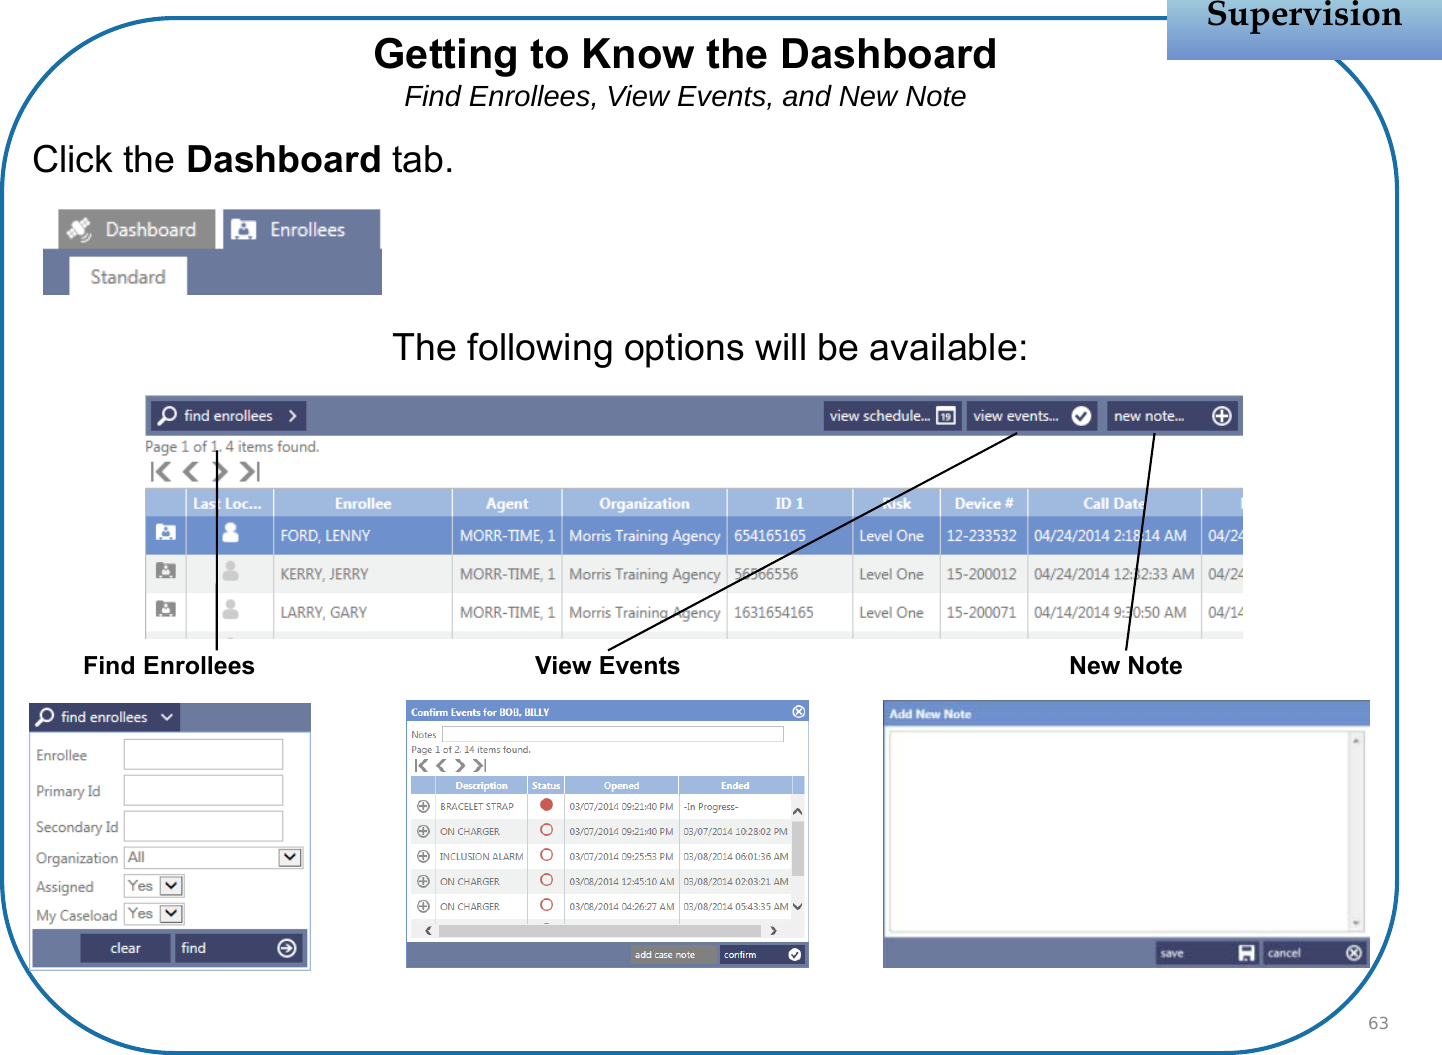 Click the Dashboard tab.The following options will be available:SupervisionSupervision63Find Enrollees View Events New NoteGetting to Know the DashboardFind Enrollees, View Events, and New Note